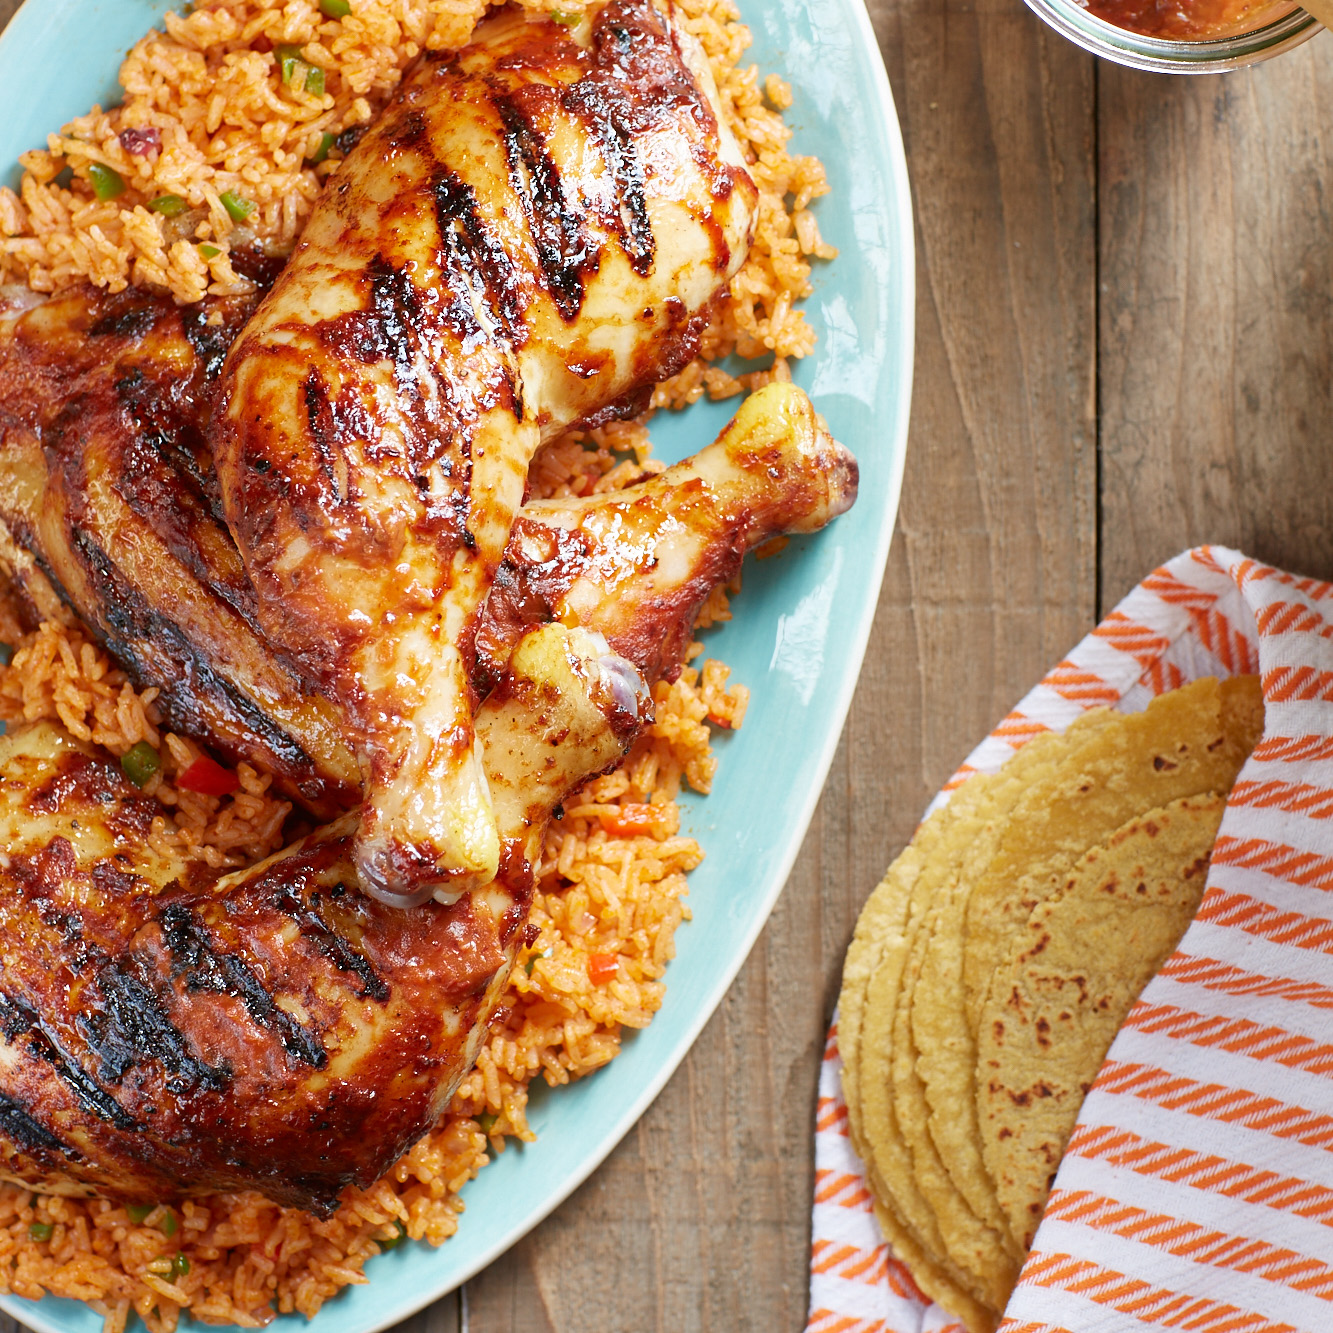 Grilled Chicken with Chipotle Barbecue Glaze